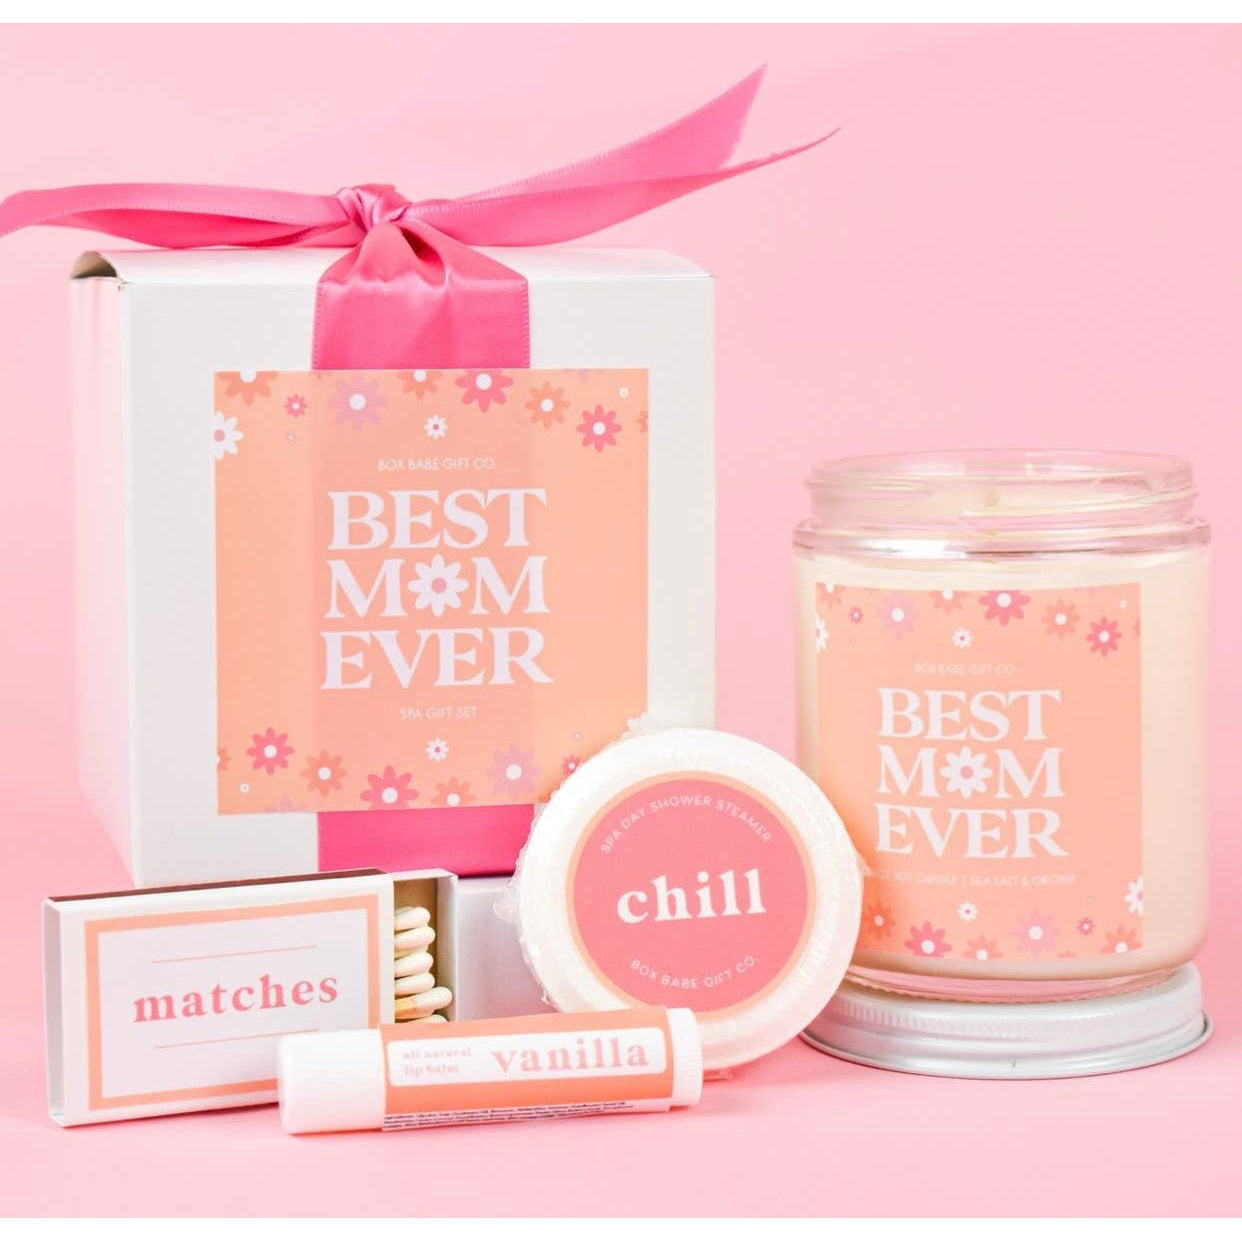 Best Mom Ever - Mother's Day Spa Gift Set